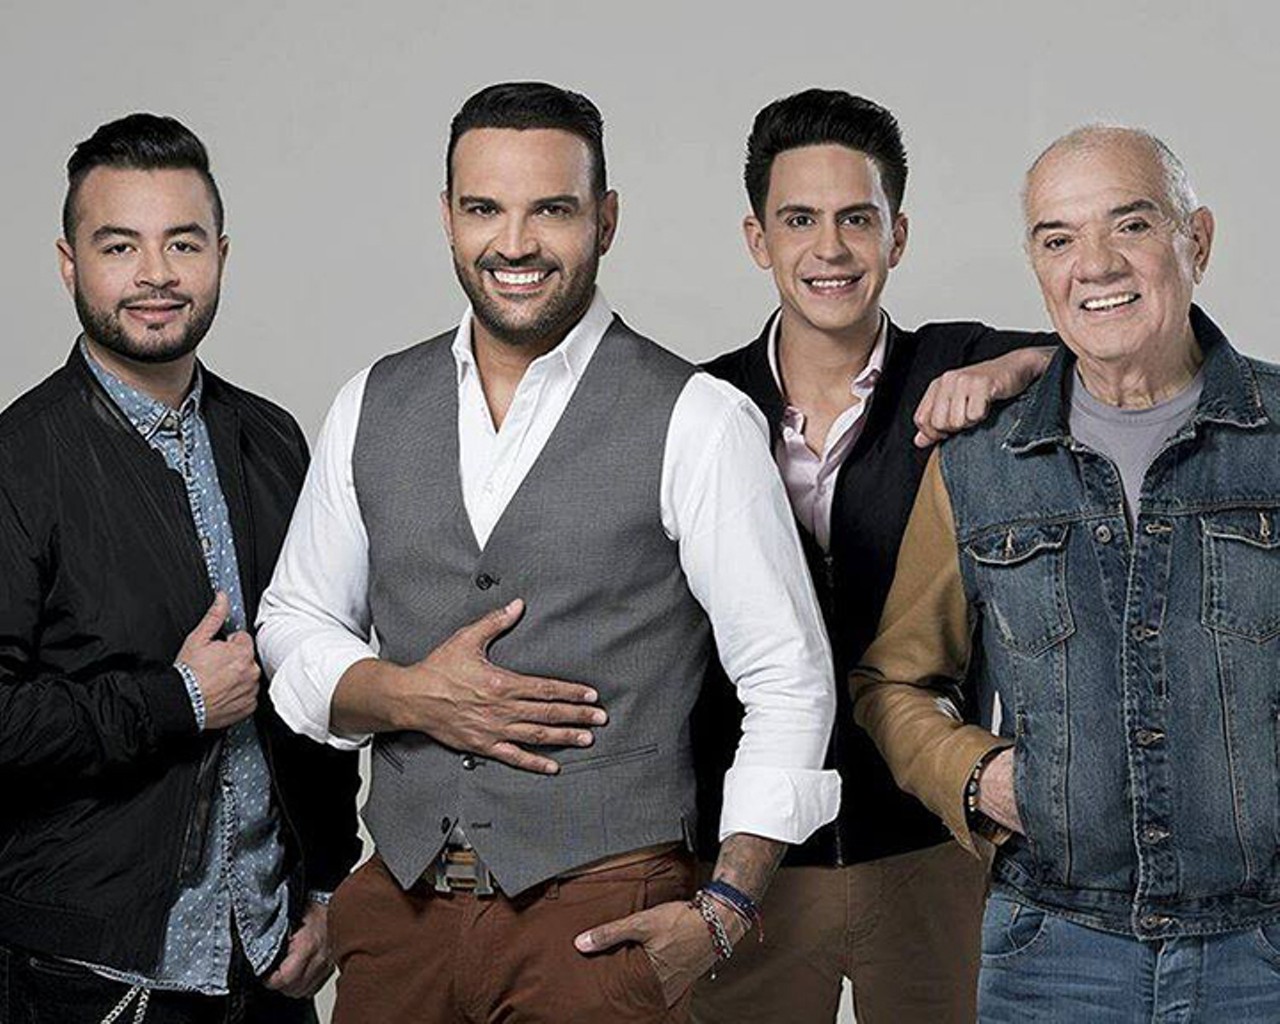 Thursday, Dec. 15Guaco at House of Blues